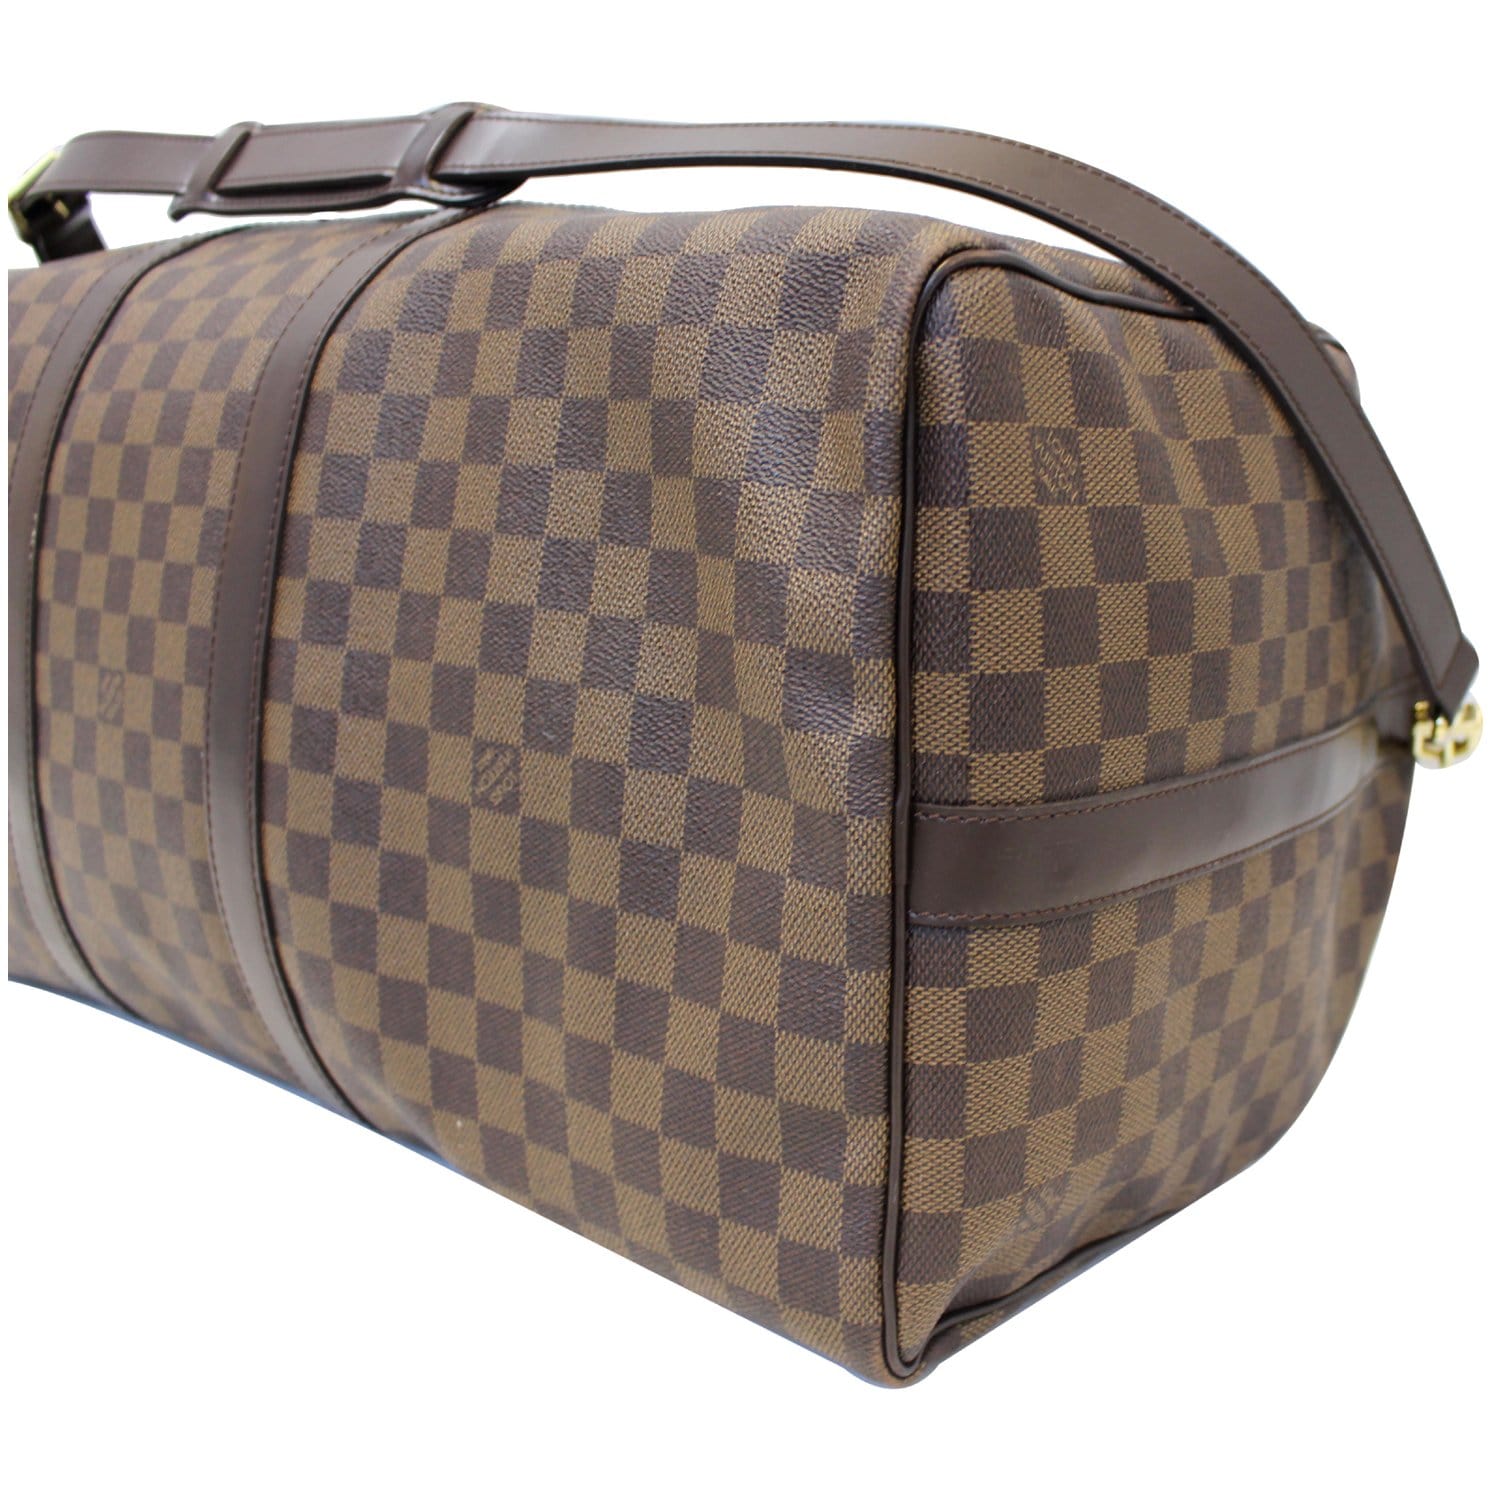 Louis Vuitton Keepall 55 Bandouliere Damier Ebene Canvas Preowned